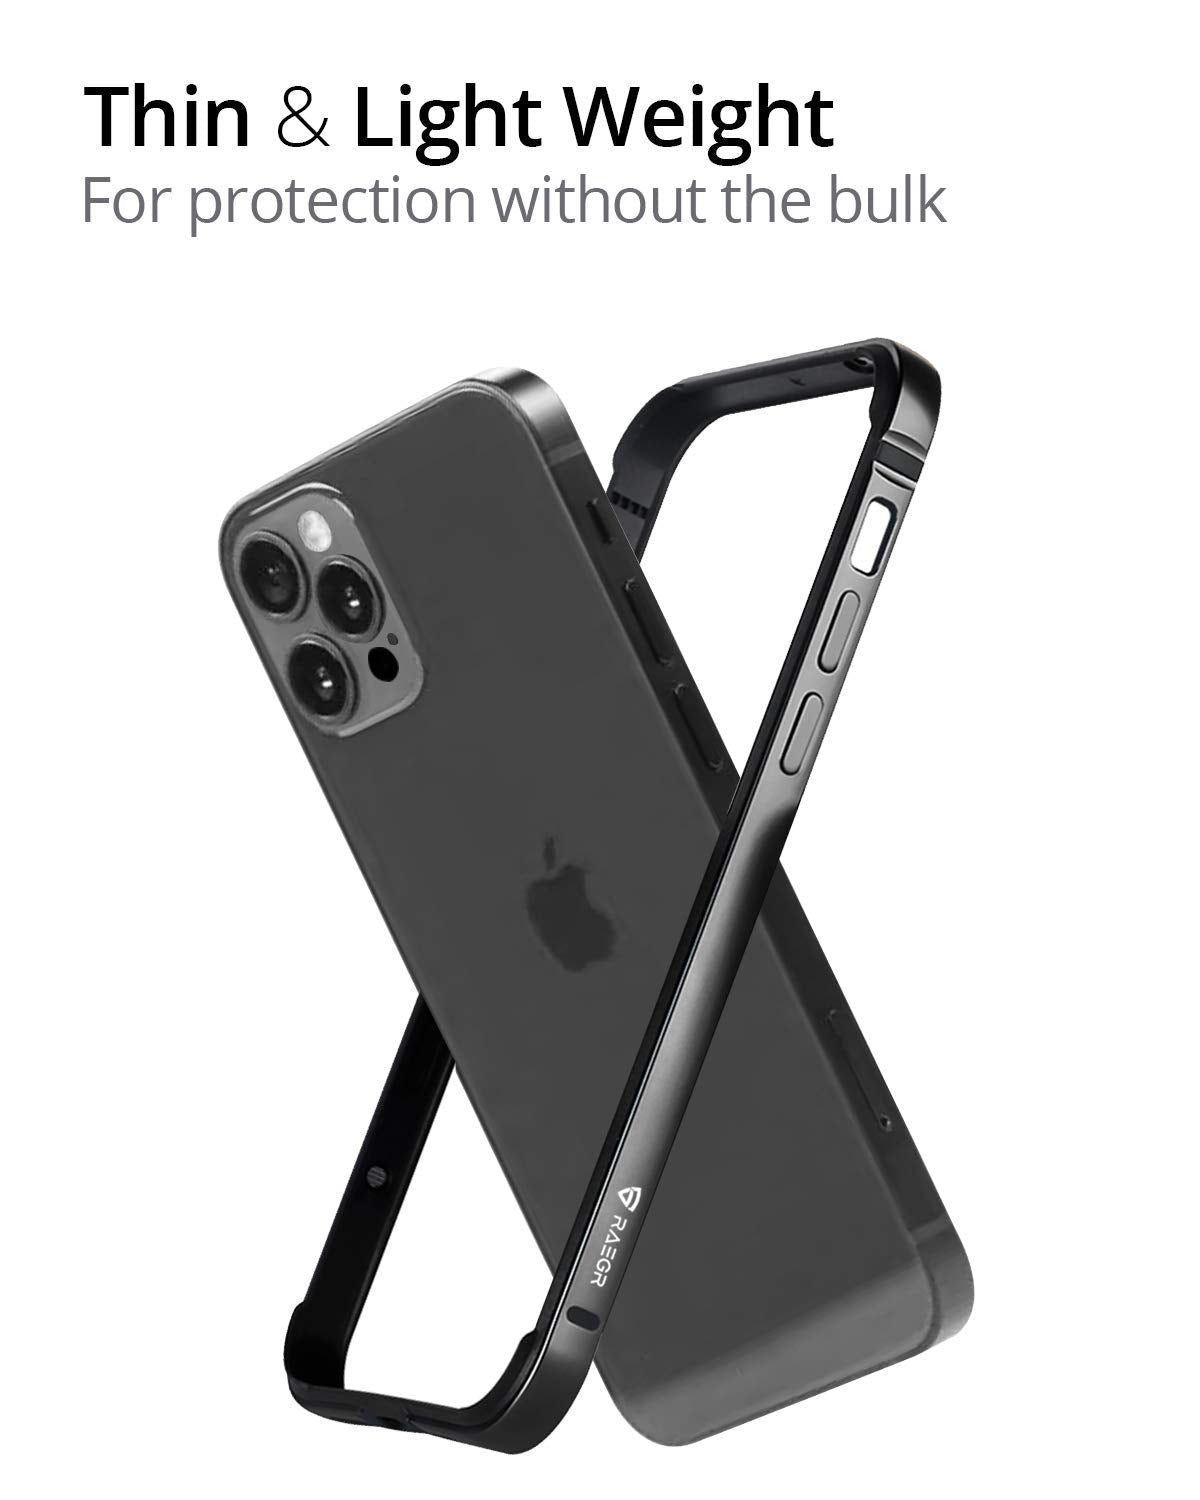 RAEGR iPhone 12 Pro Max 5G Anodized Aluminum Bumper Case, Supports Mag-Safe Wireless Charging 6.7